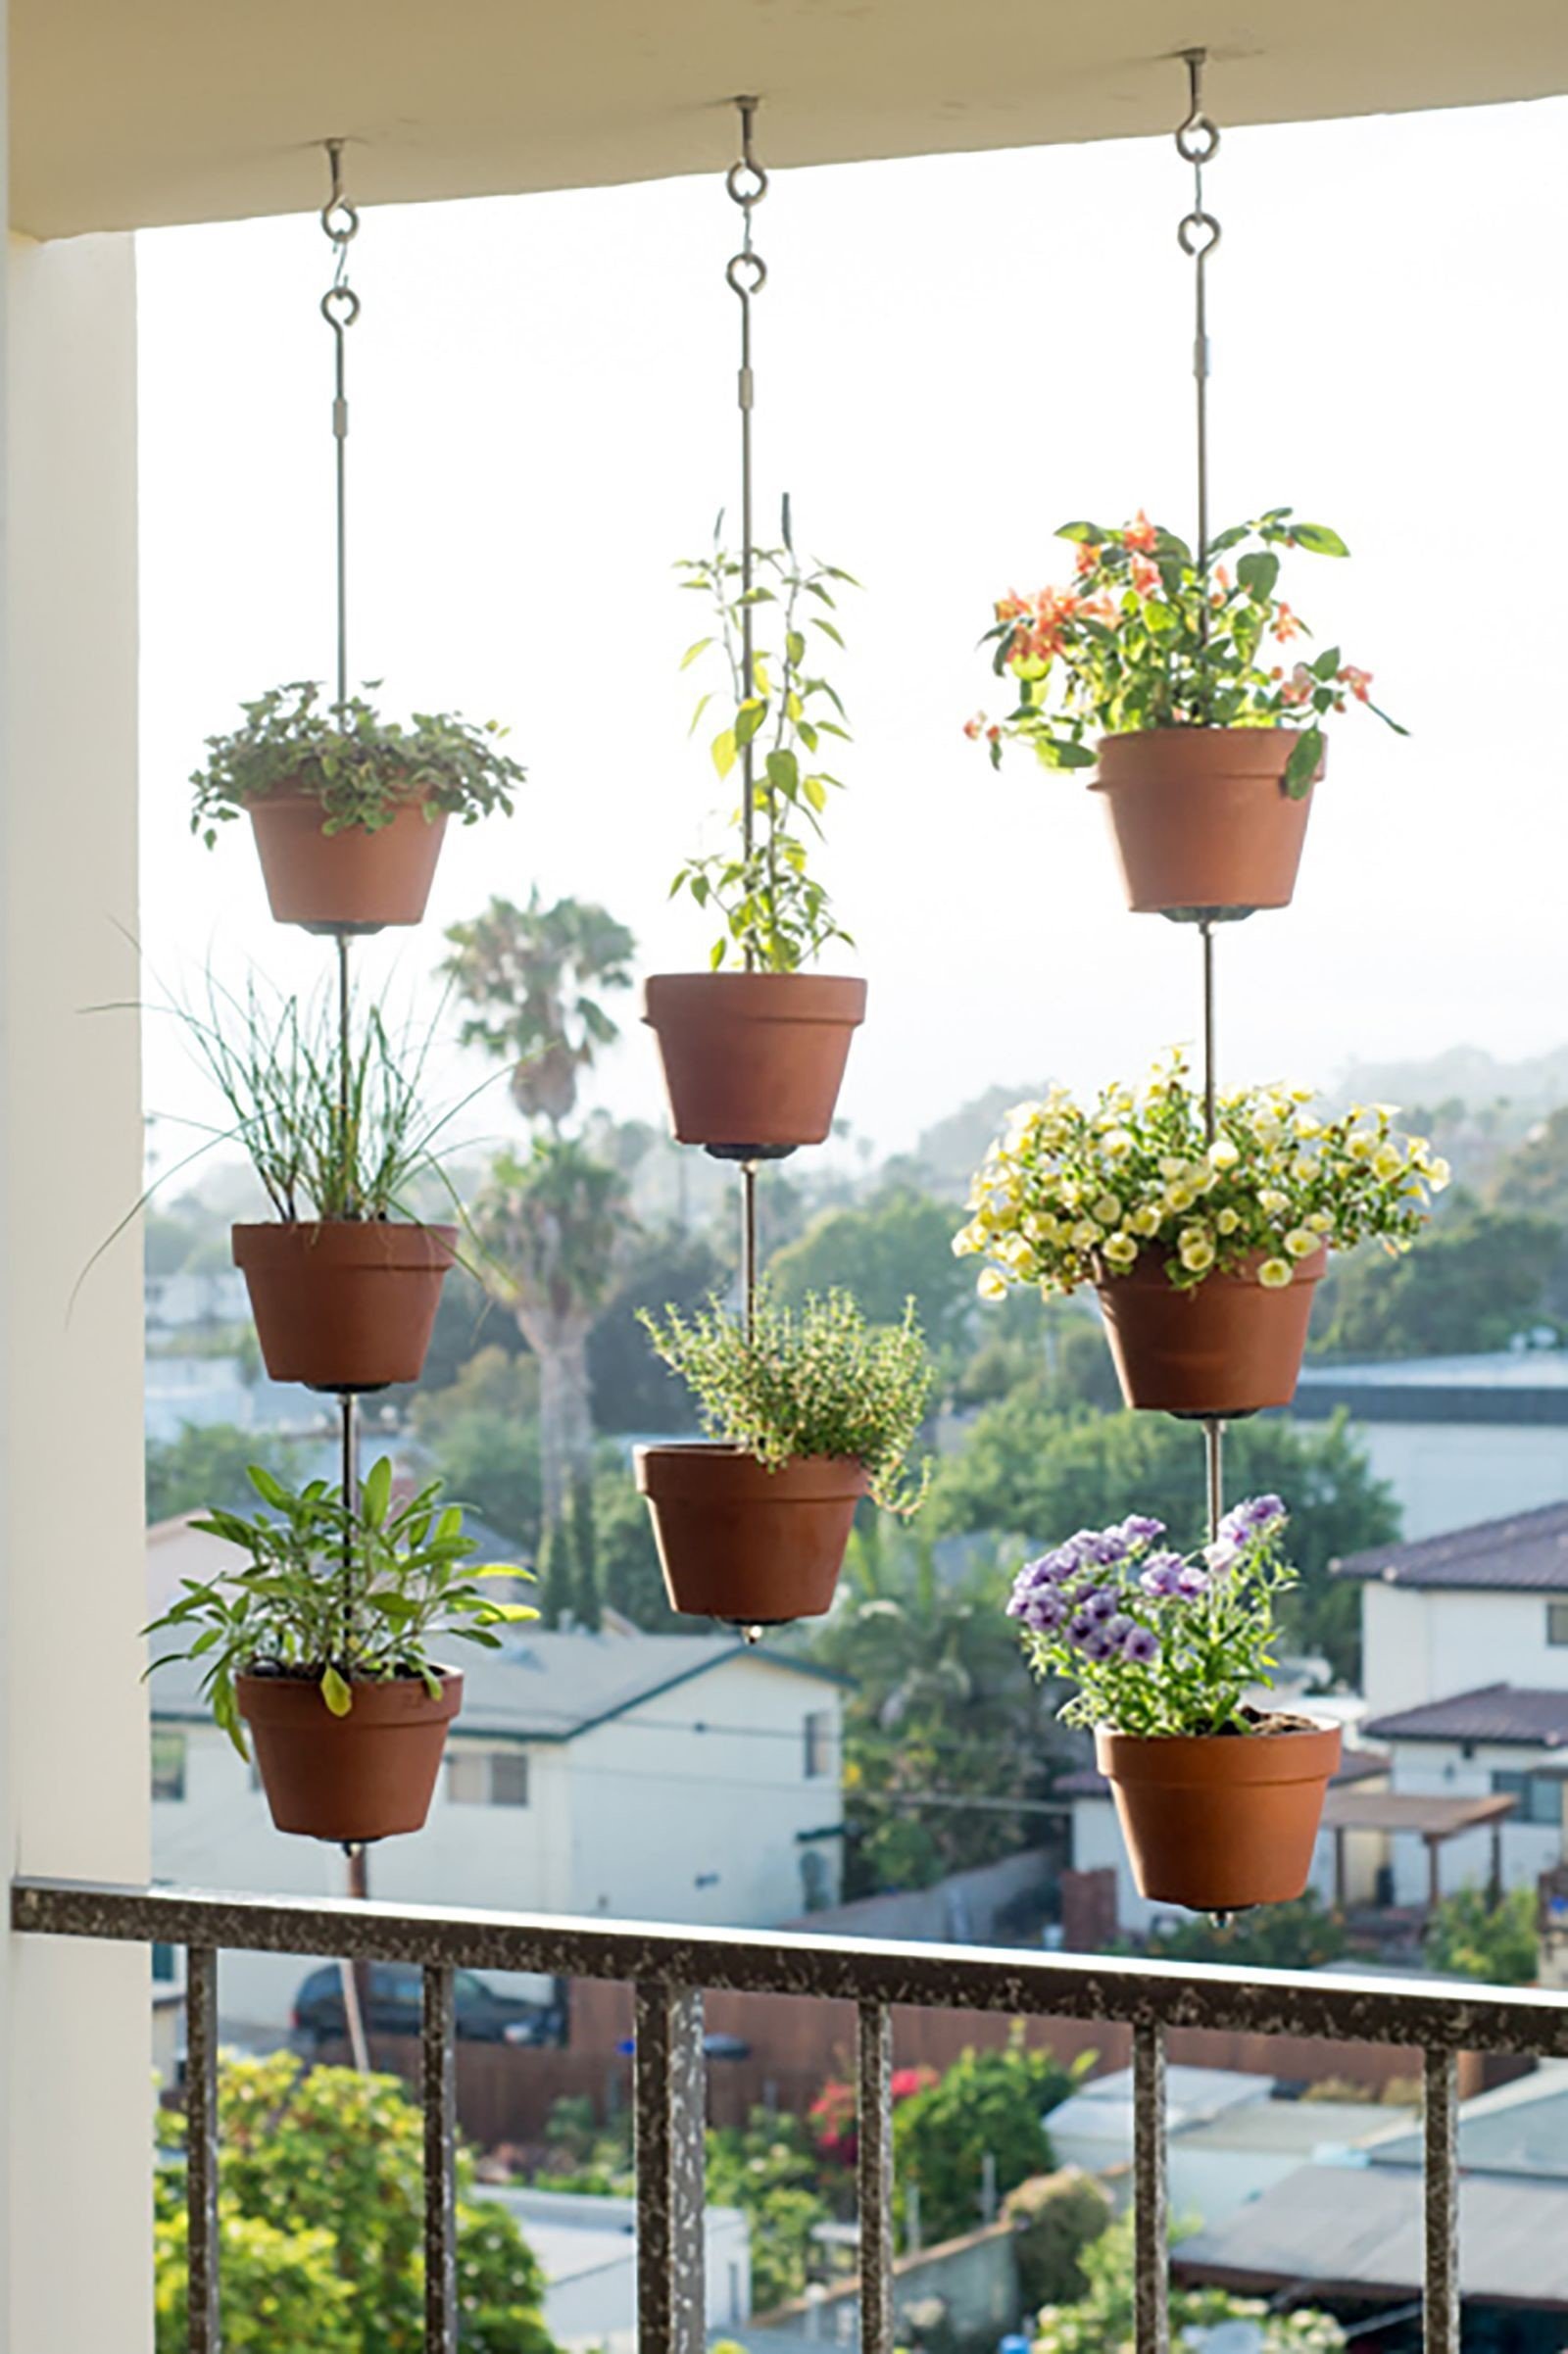 Decorating with Plants: 16 Ideas to Make Plants Part of the Decor